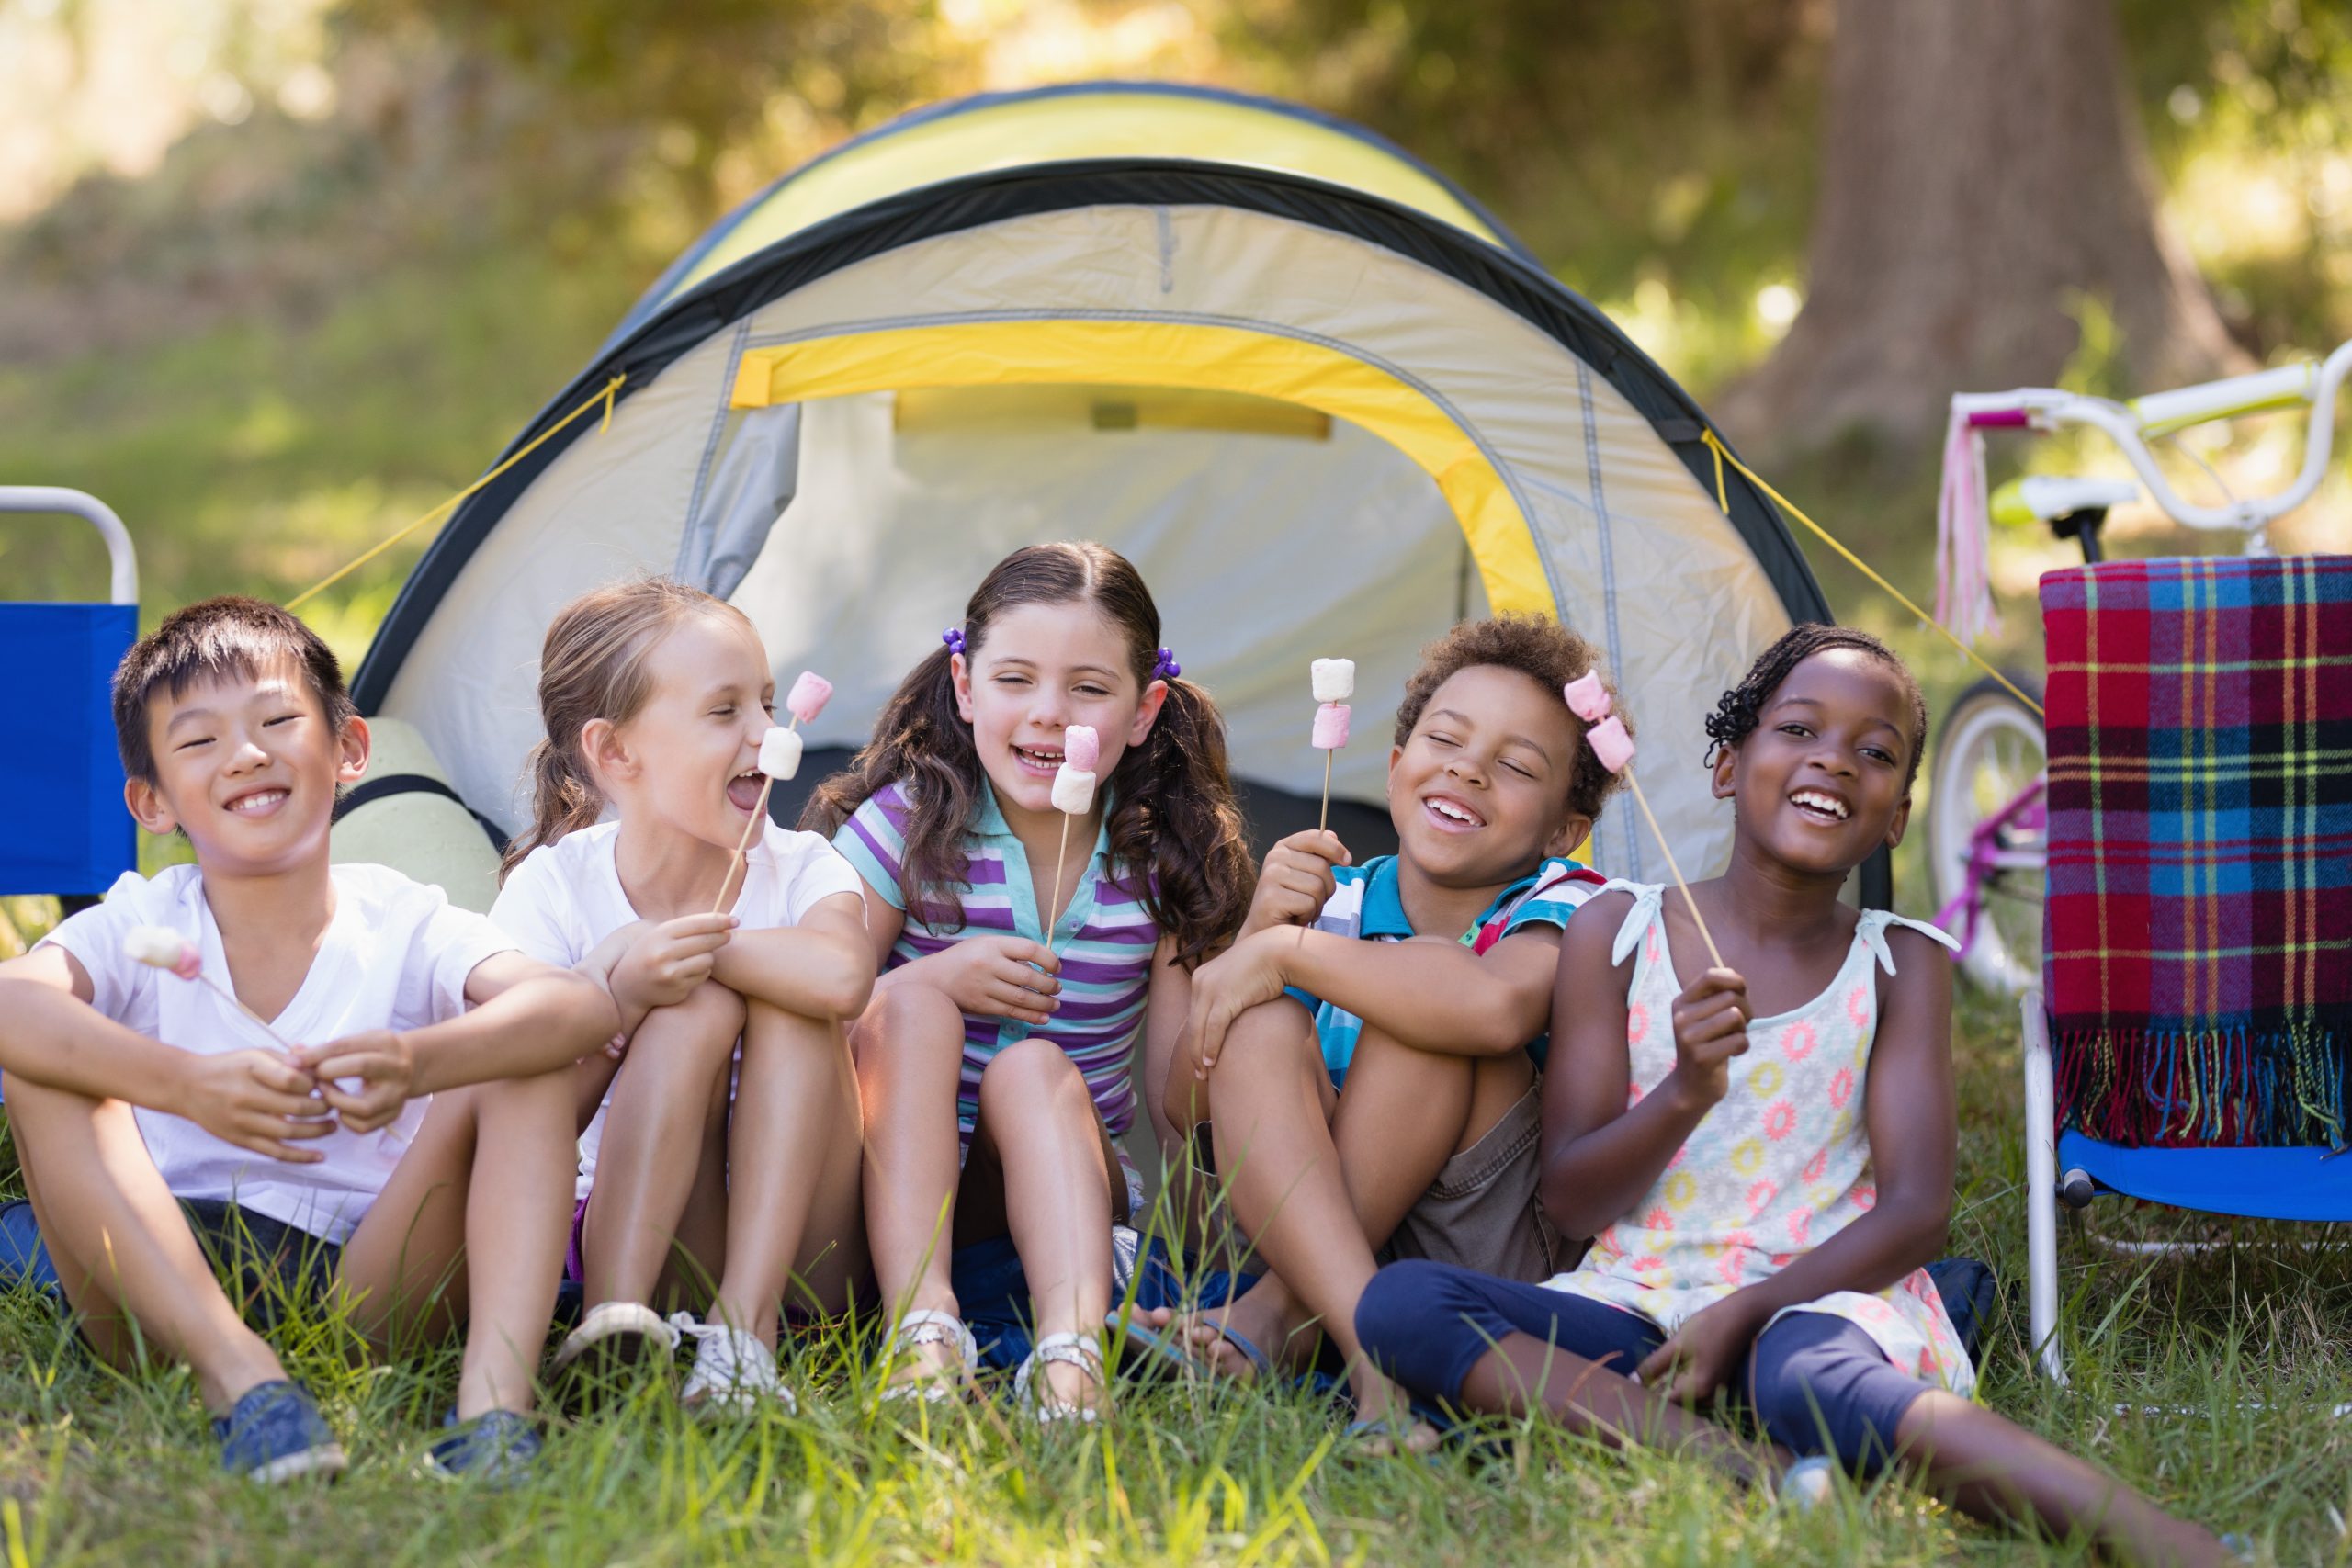 Group of children roasting marshmallows at a campsite